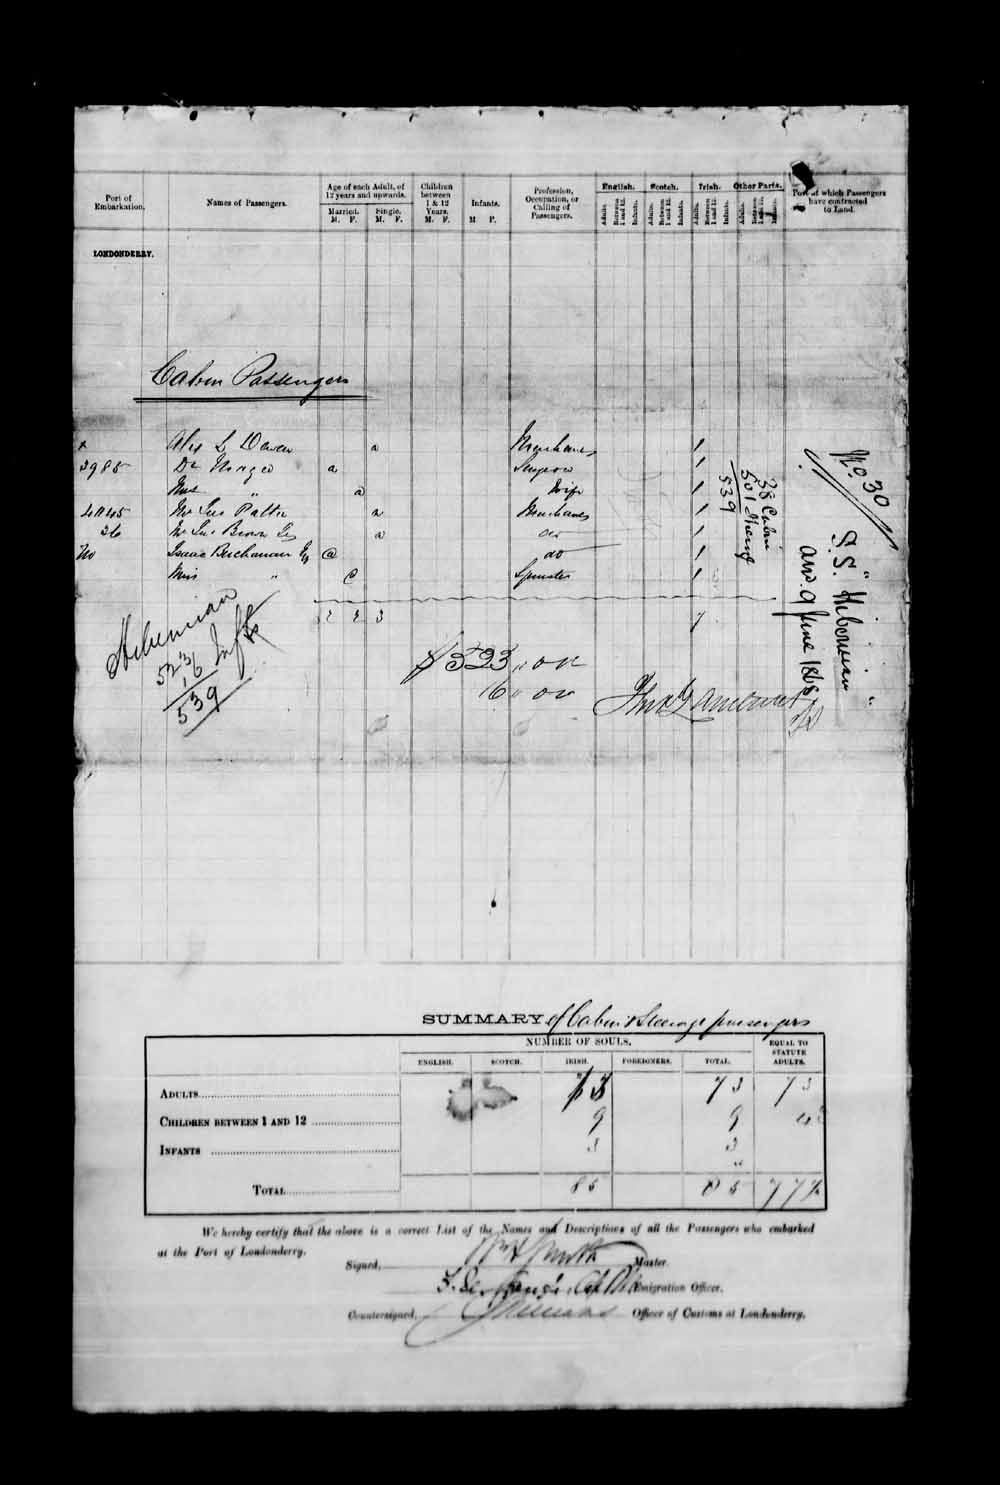 Digitized page of Passenger Lists for Image No.: e003530466